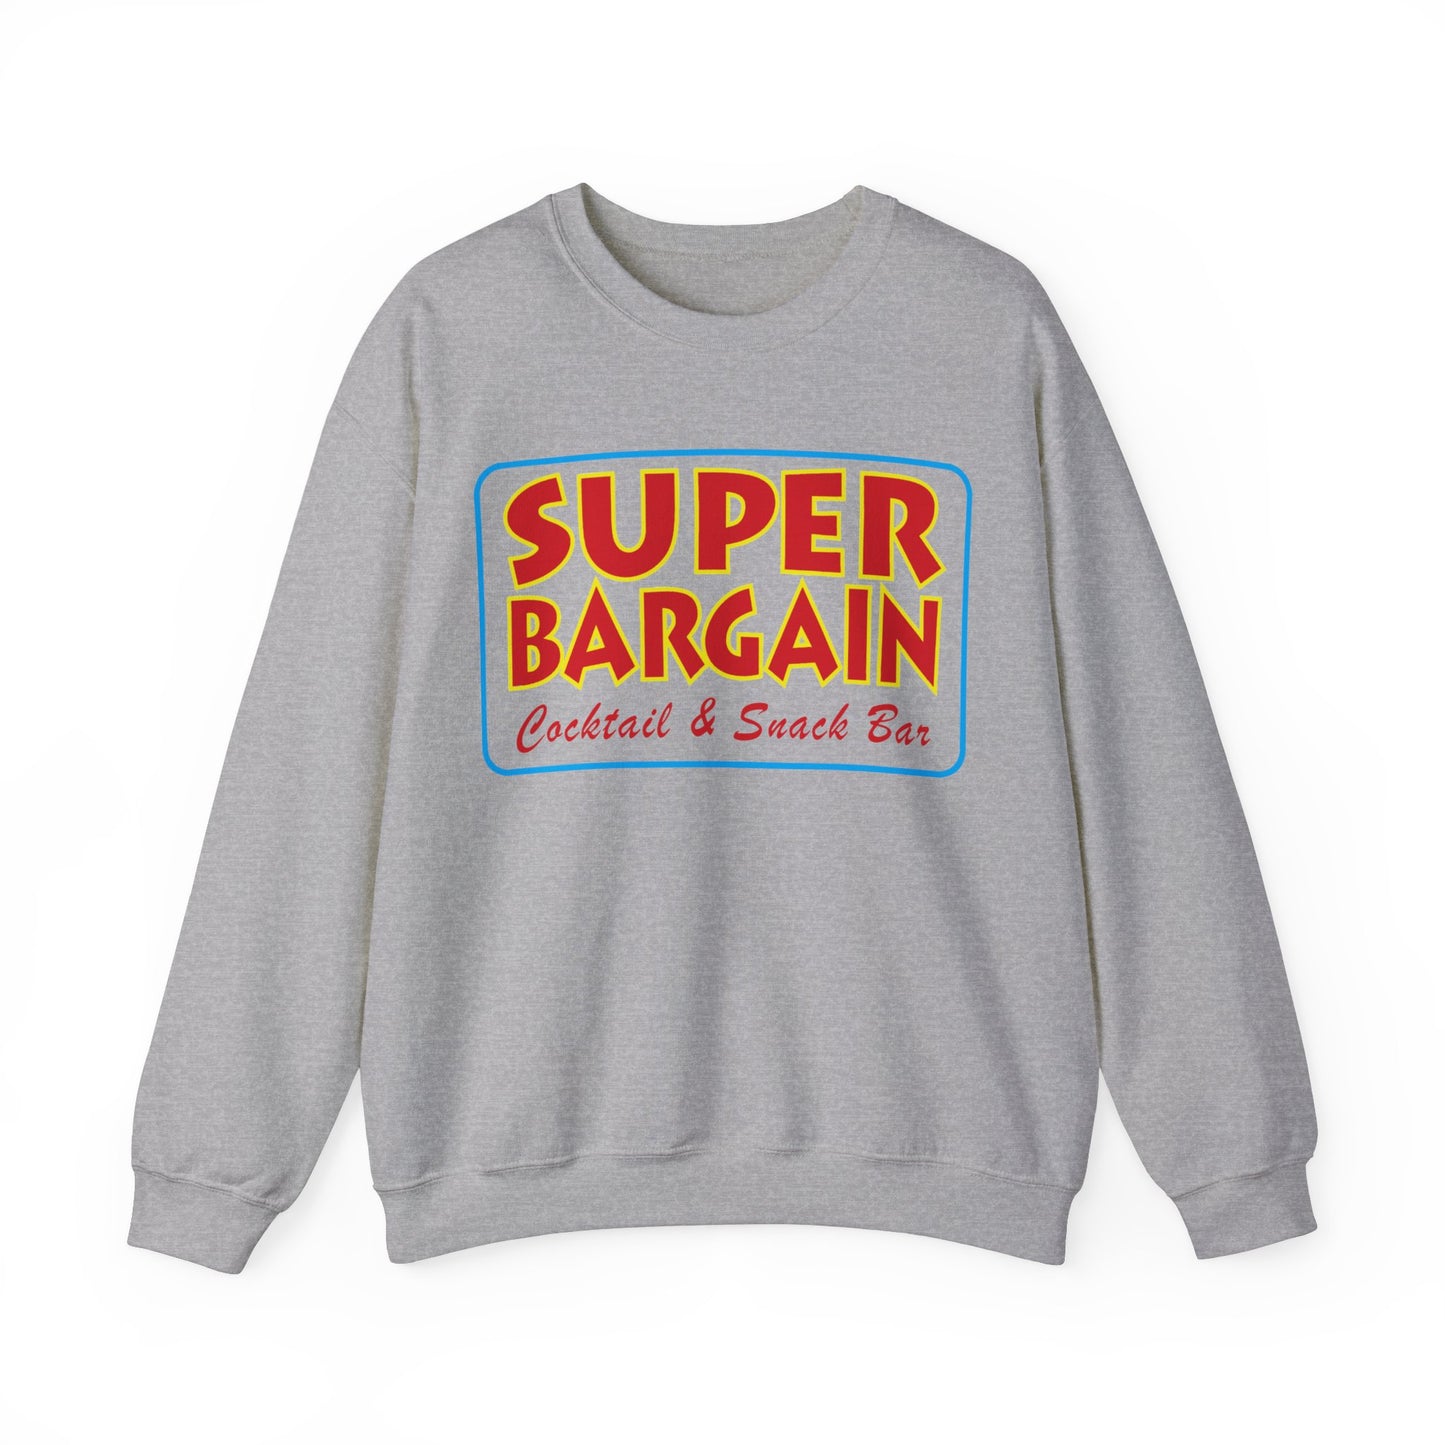 A gray Unisex Heavy Blend™ Crewneck Signature Logo Sweatshirt with a colorful design that reads "SUPER BARGAIN Cocktail & Snack Bar, Cabbagetown" in yellow, red, and blue retro-style lettering by Printify.